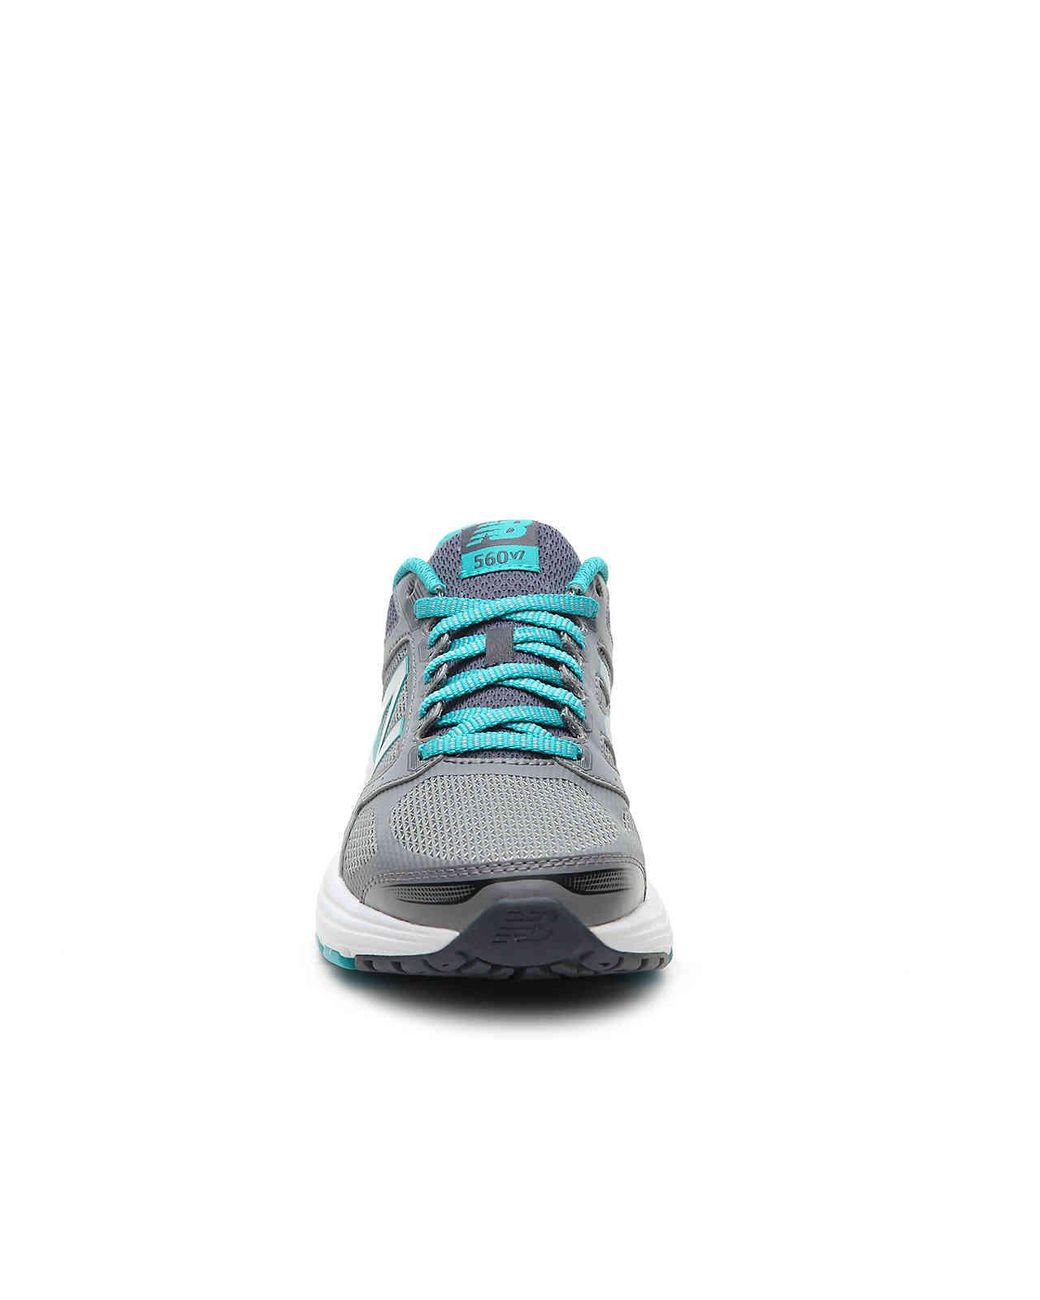 New Balance 560 V7 Running Shoe in Grey/Teal (Gray) | Lyst